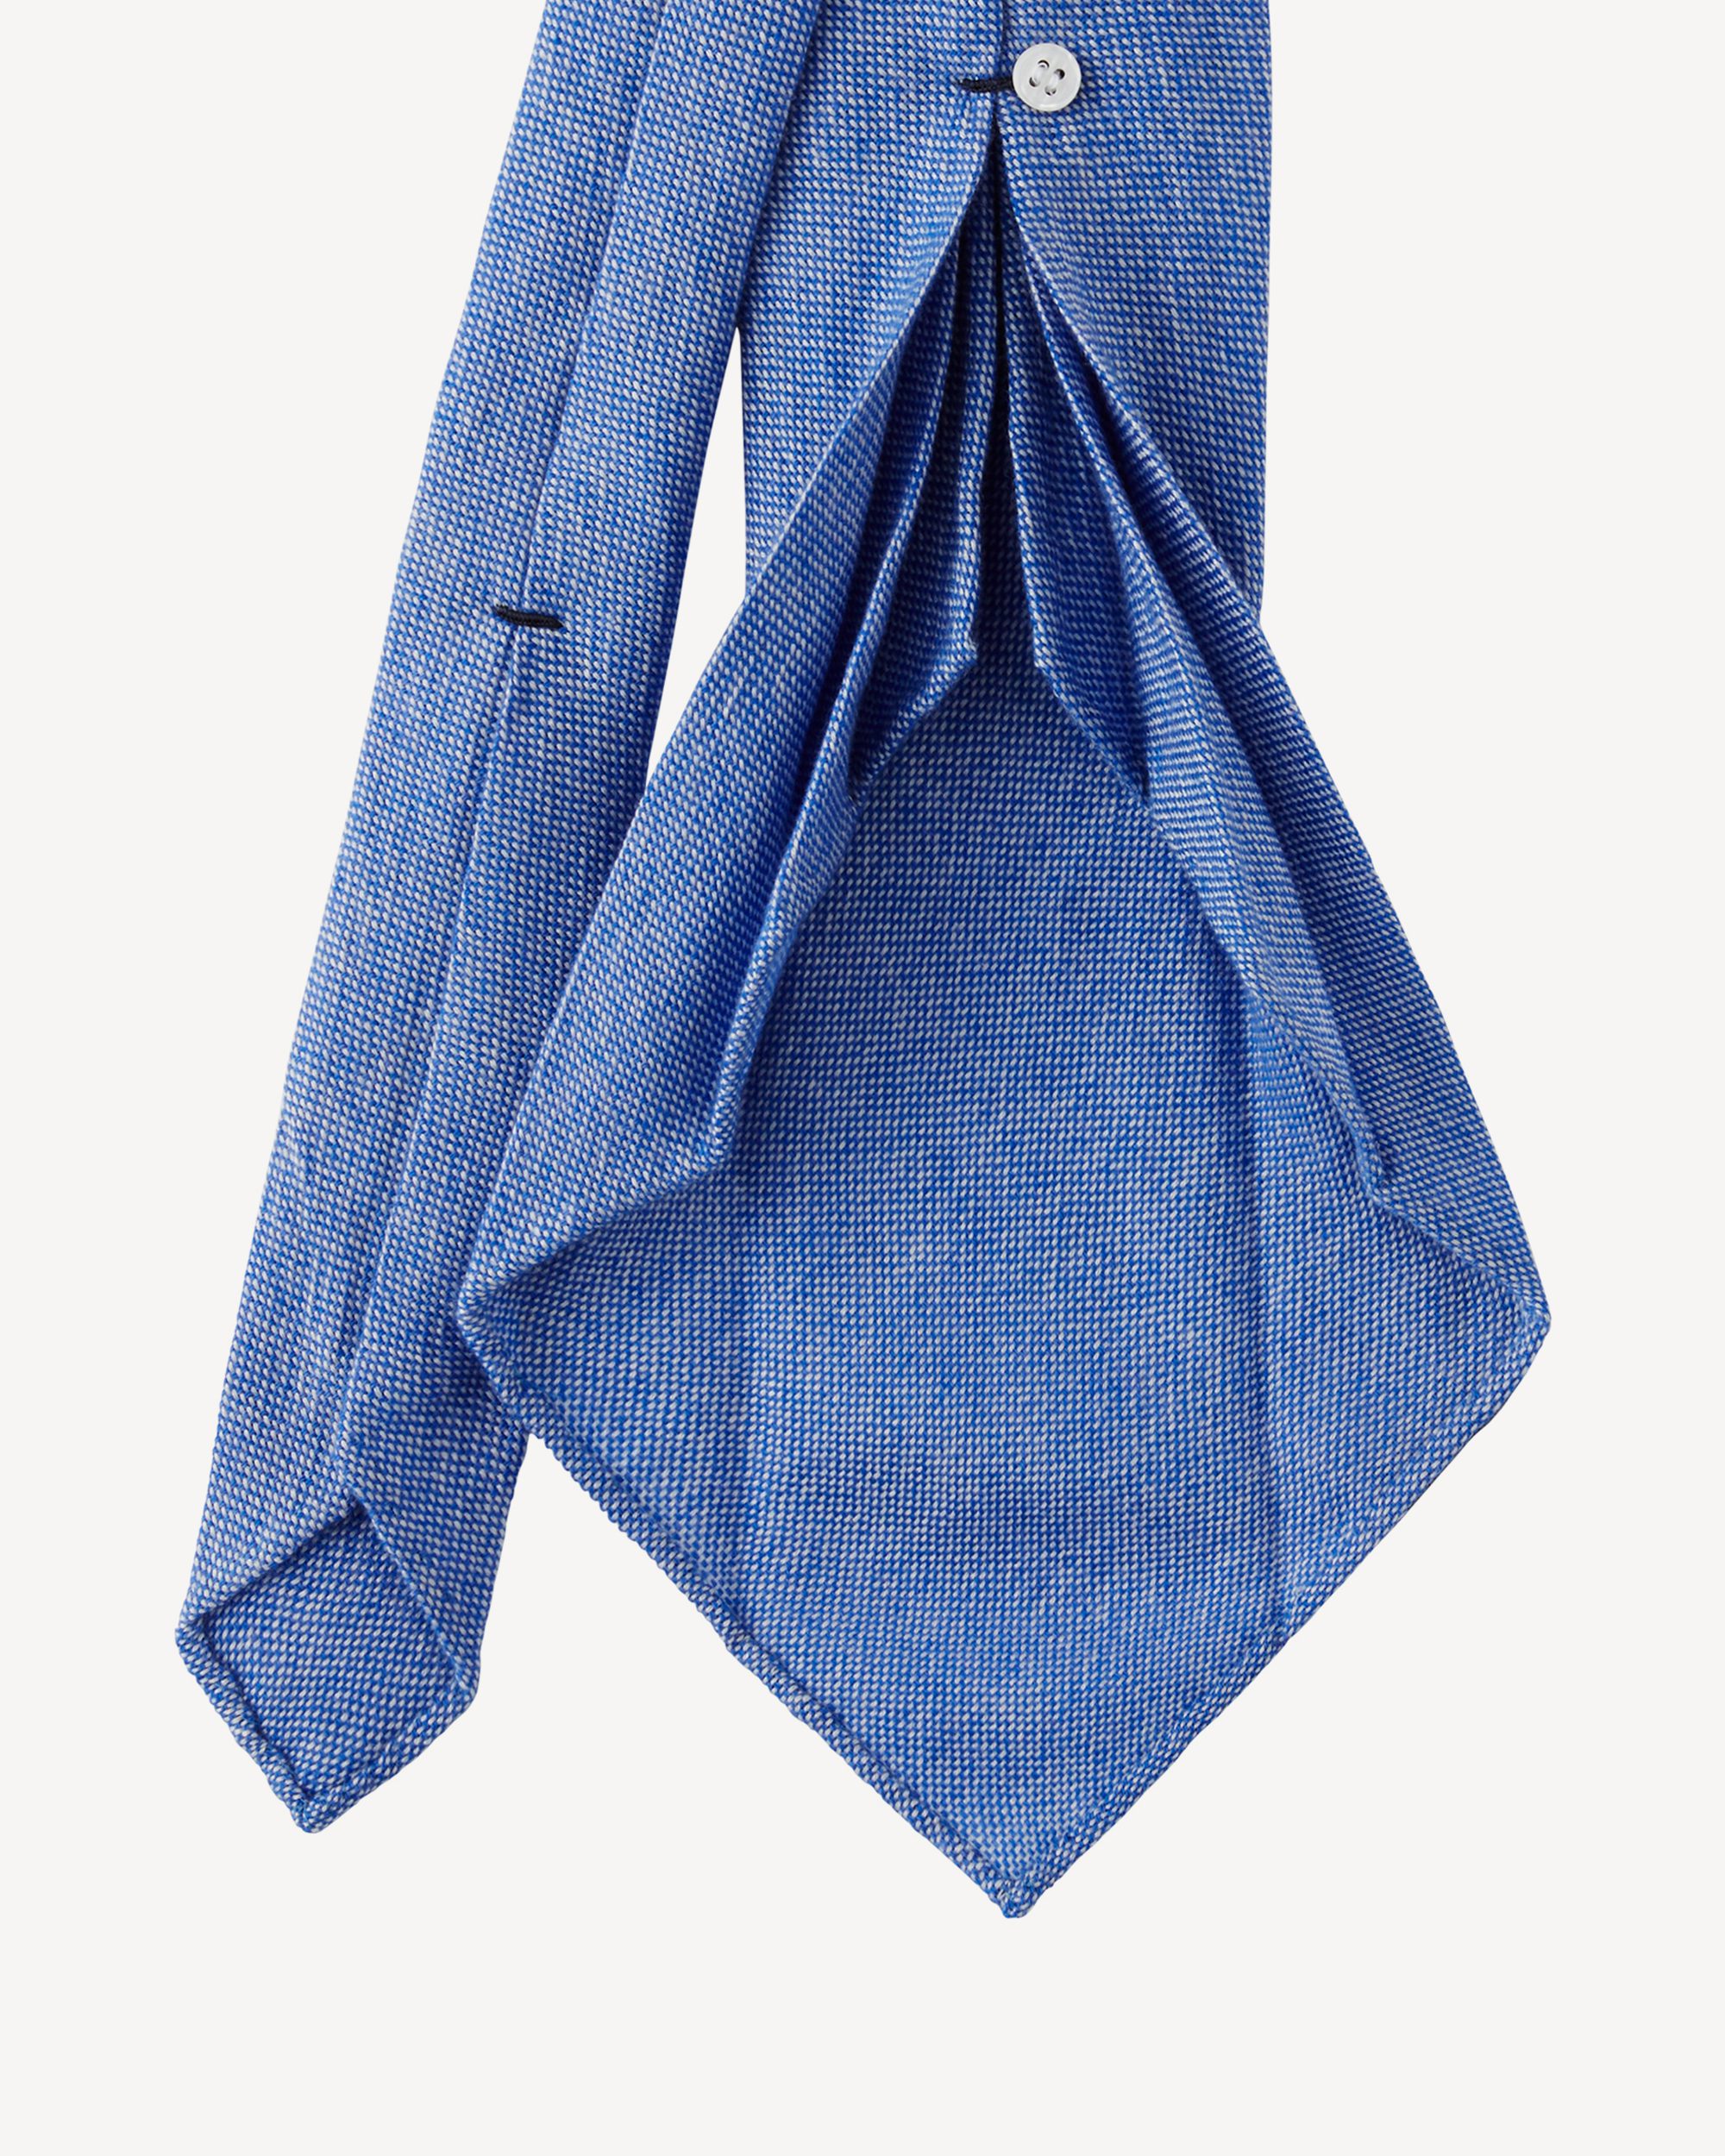 100% Cashmere Handrolled Tie - Ice Blue Solid | Viola Milano